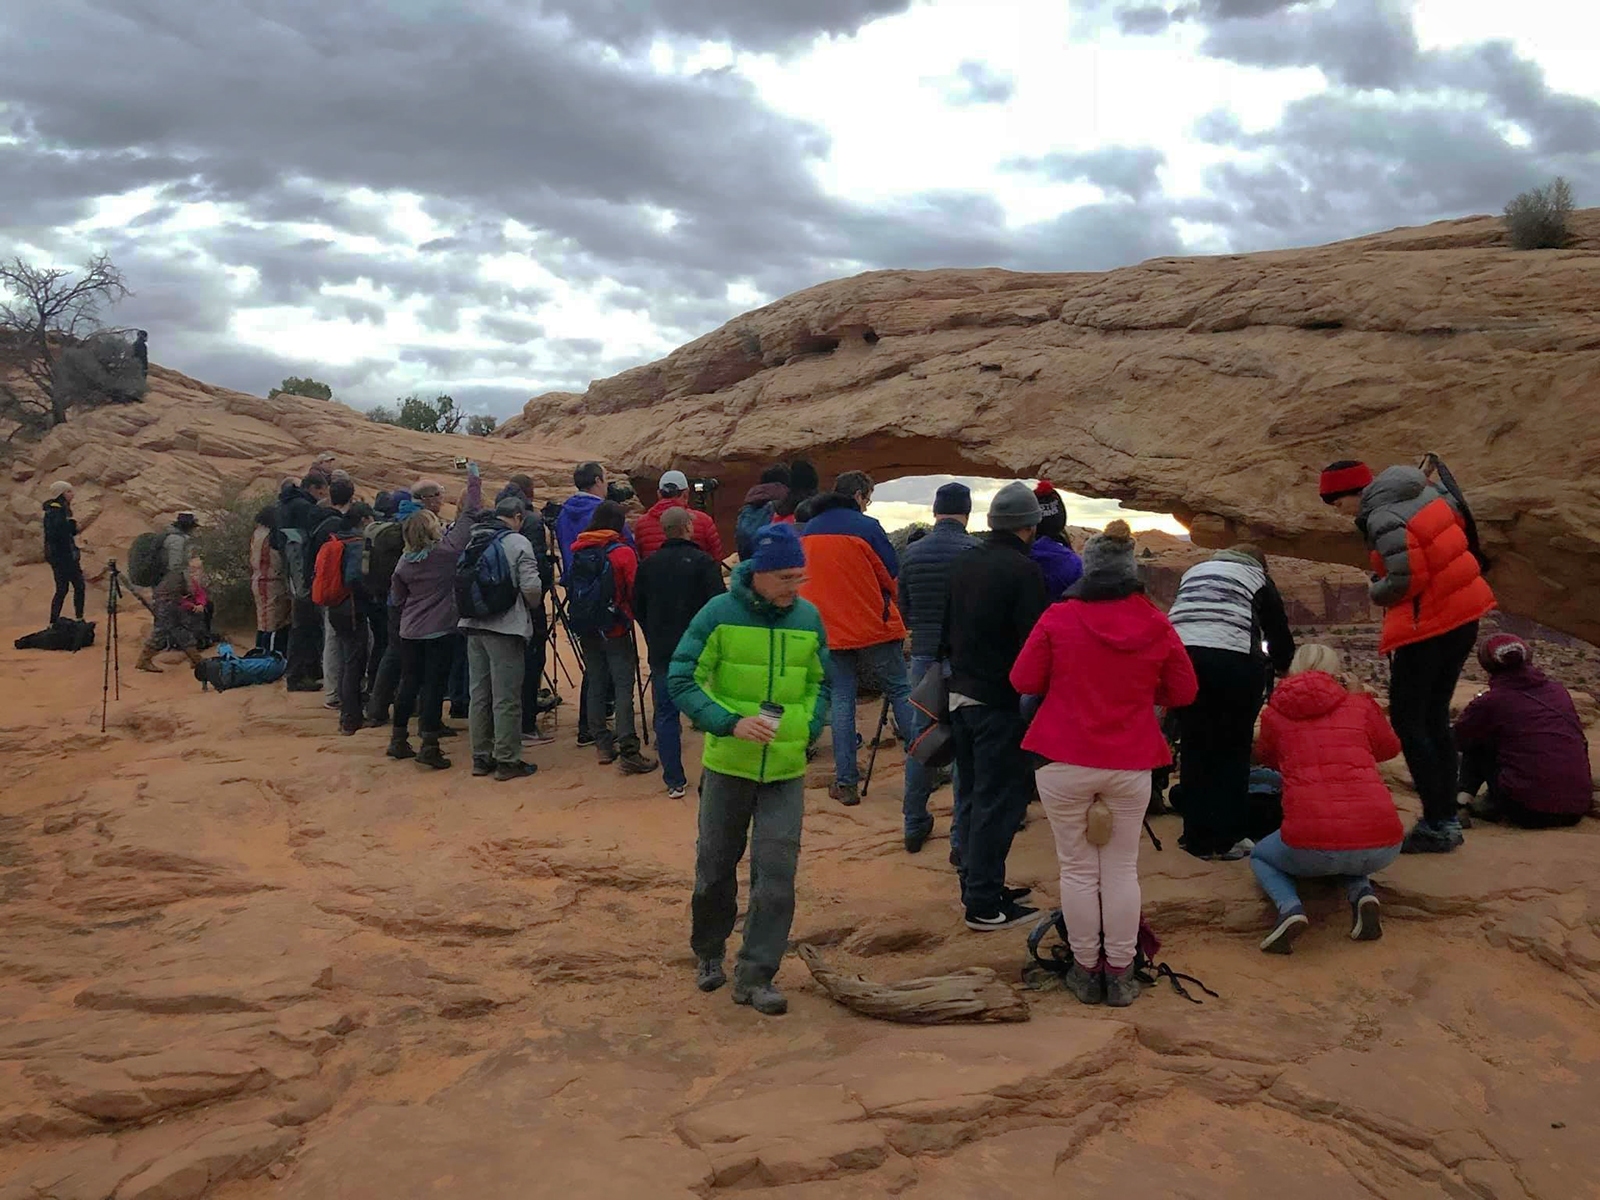 early morning crowds at Mesa Arch